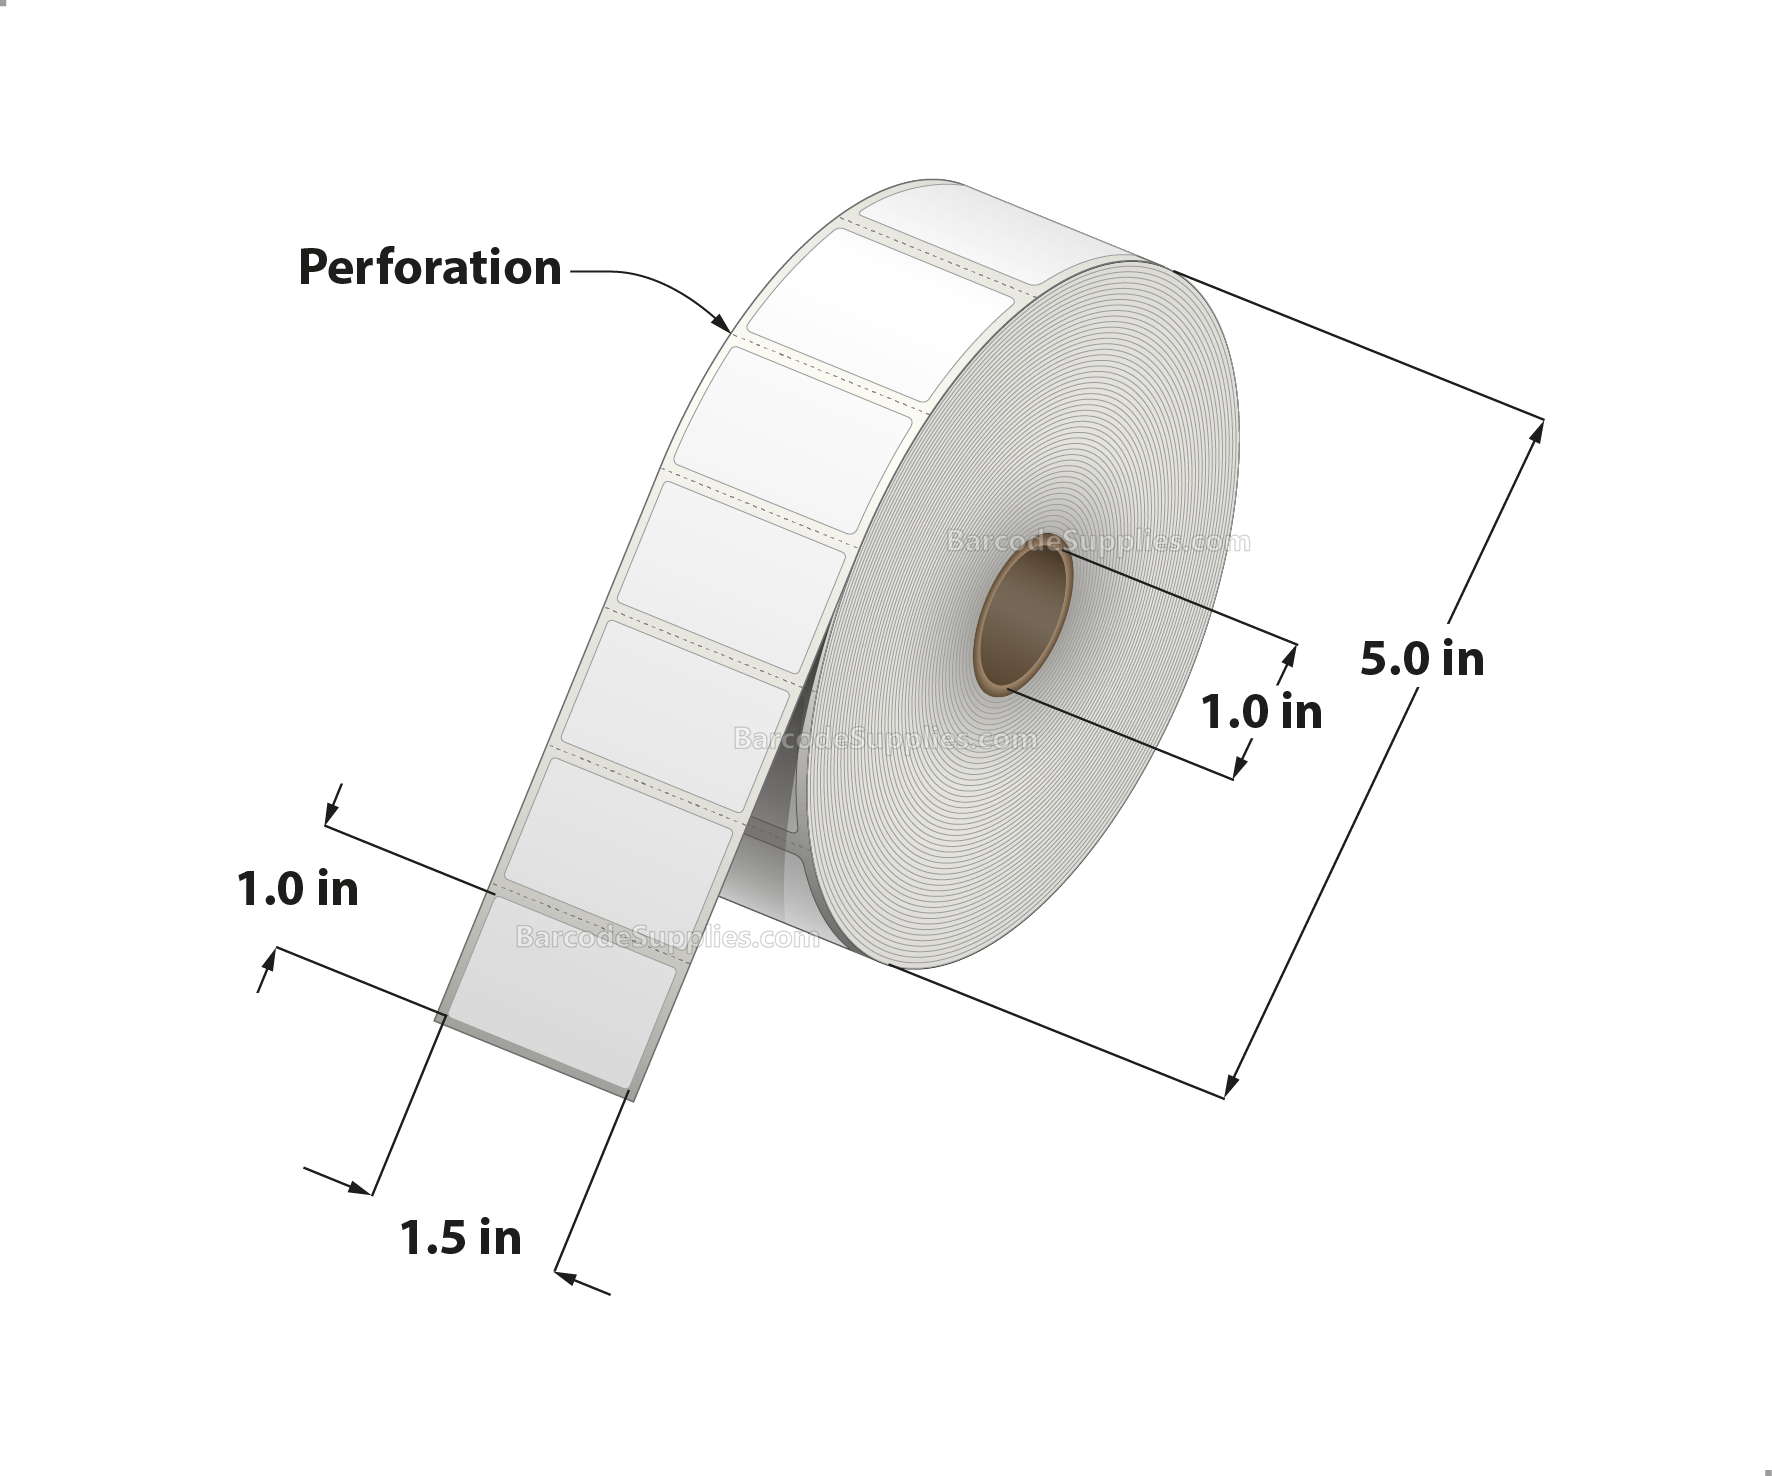 1.5 x 1 Thermal Transfer White Labels With Permanent Acrylic Adhesive - Perforated - 2300 Labels Per Roll - Carton Of 4 Rolls - 9200 Labels Total - MPN: TH151-1PTTPOLY